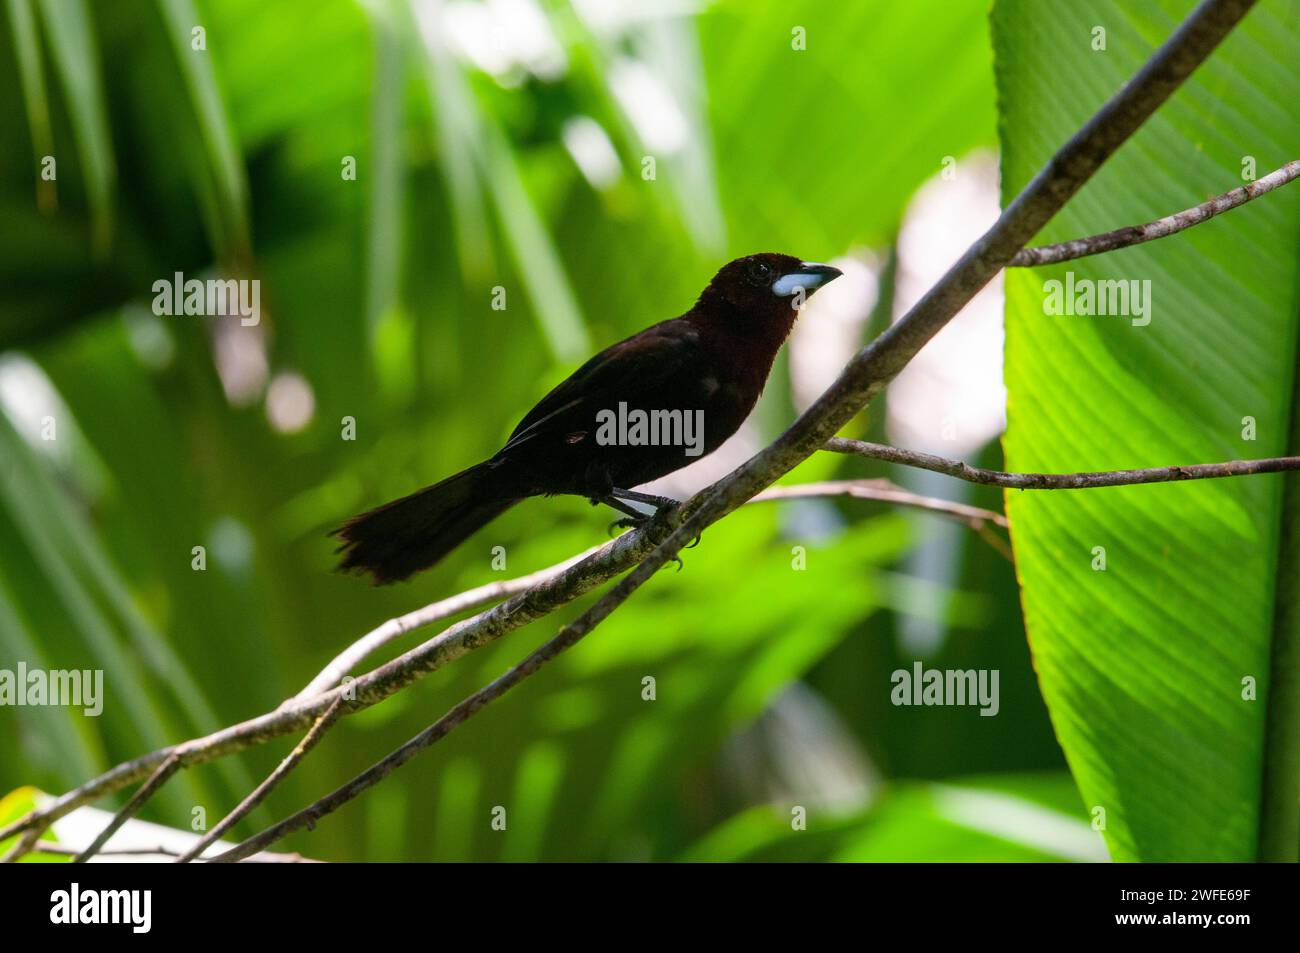 The solitary cacique or solitary black cacique (Cacicus solitarius) is a species of bird in the family Icteridae.  It is found in Argentina, Bolivia, Stock Photo